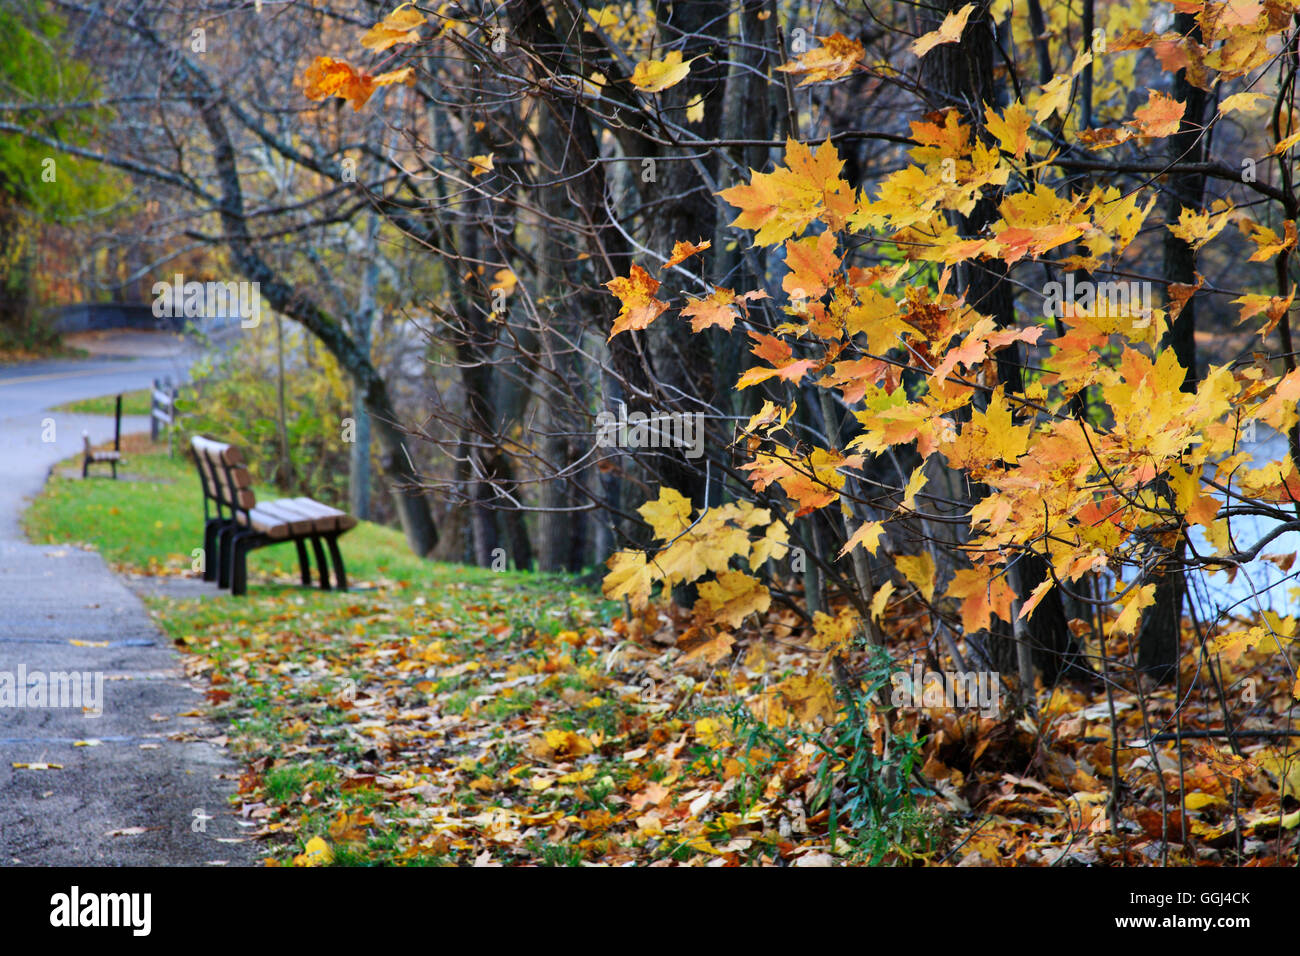 The remaining yellow leaves and a park bench along a walking path on a wet and rainy late autumn day, Sharon Woods, Ohio, USA Stock Photo